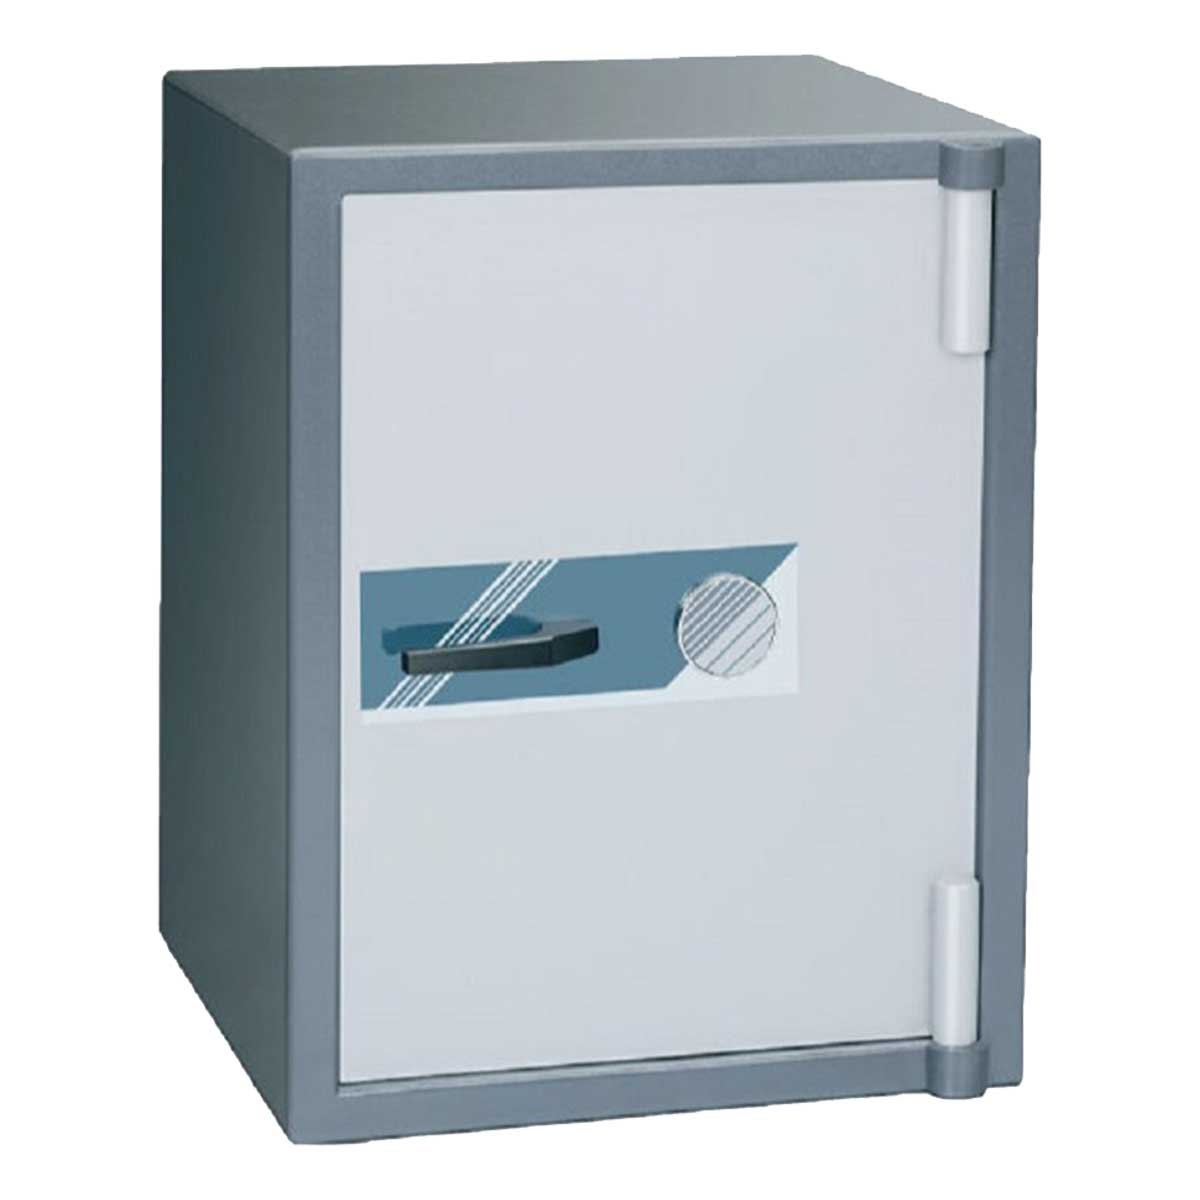 Burglary Safes Manufacturers, Suppliers in Chandni Chowk